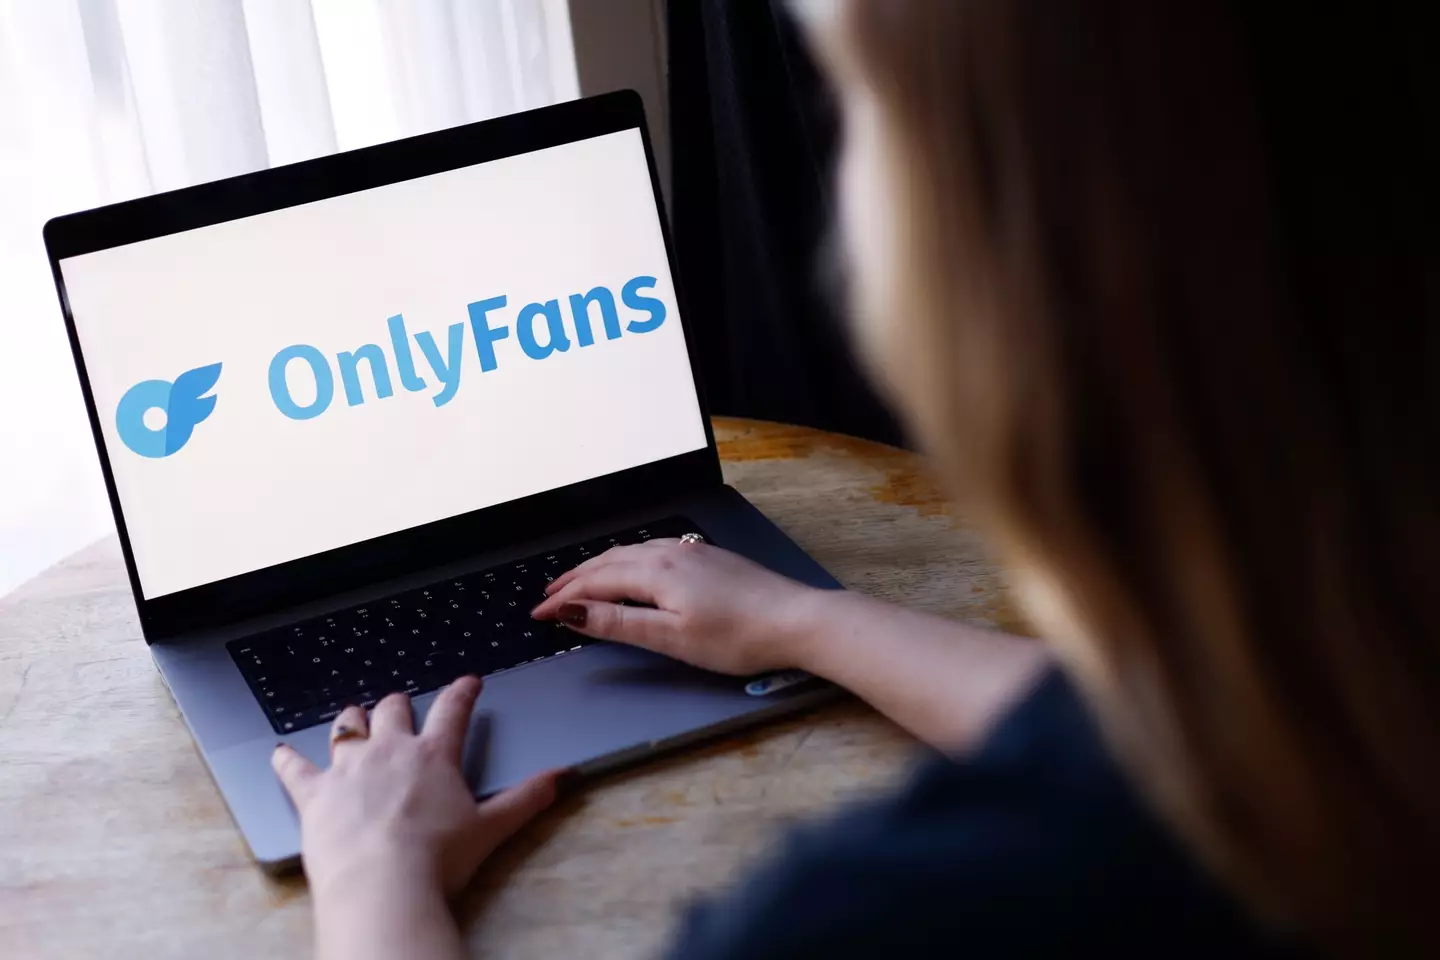 Coppage explained that she knew the risks when she joined OnlyFans and that if given the opportunity she would do it again.